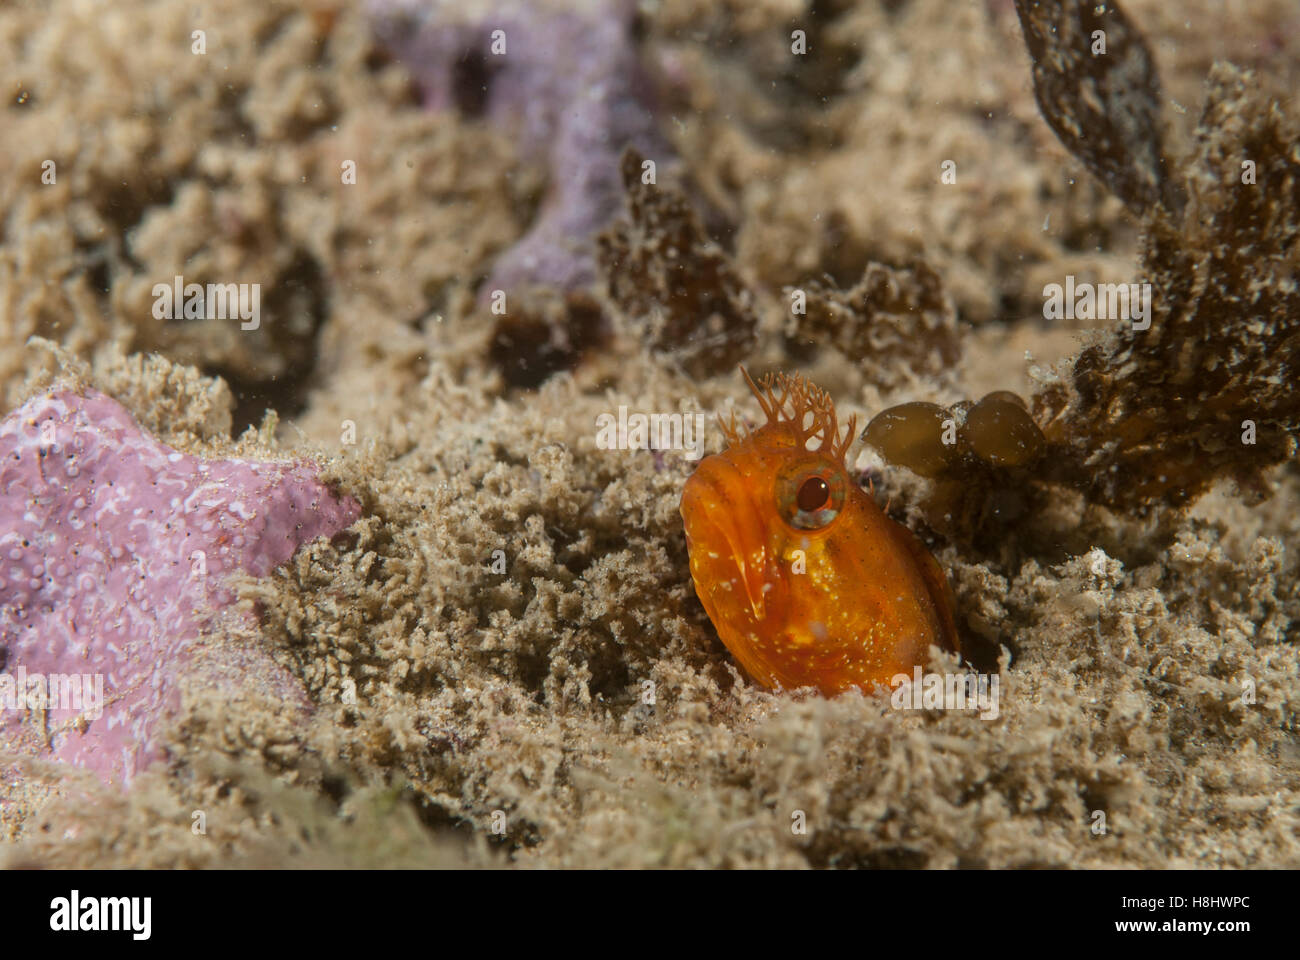 Yellowfin fringehead, an orange blenny fish, sticks its head out of a hole. Stock Photo